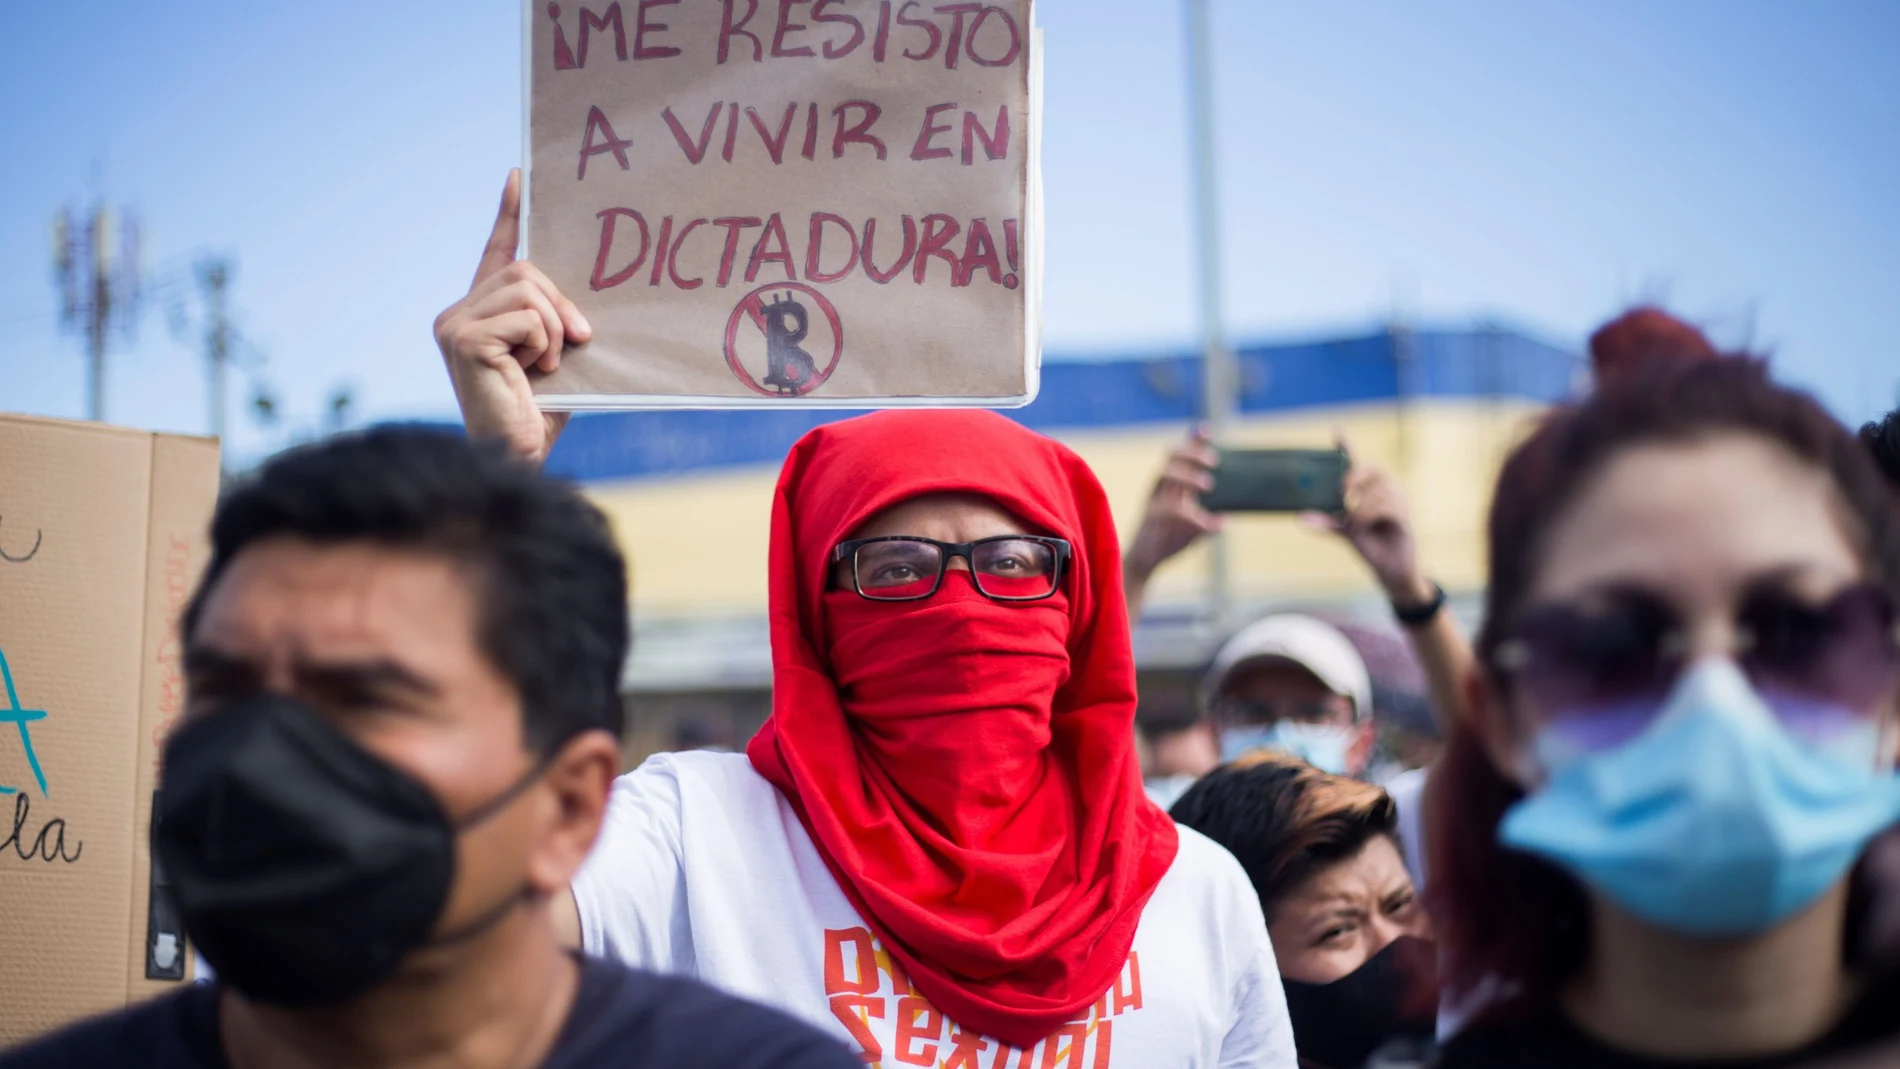 A demonstrator holds up a banner that reads "I resist living in a dictatorship" during a protest against El Salvador's President Nayib Bukele and the recent decision by the Constitutional Chamber of the Supreme Court of Justice approving a law that allows his re-election in 2024, in San Salvador, El Salvador September 5, 2021. REUTERS/Victor Pena